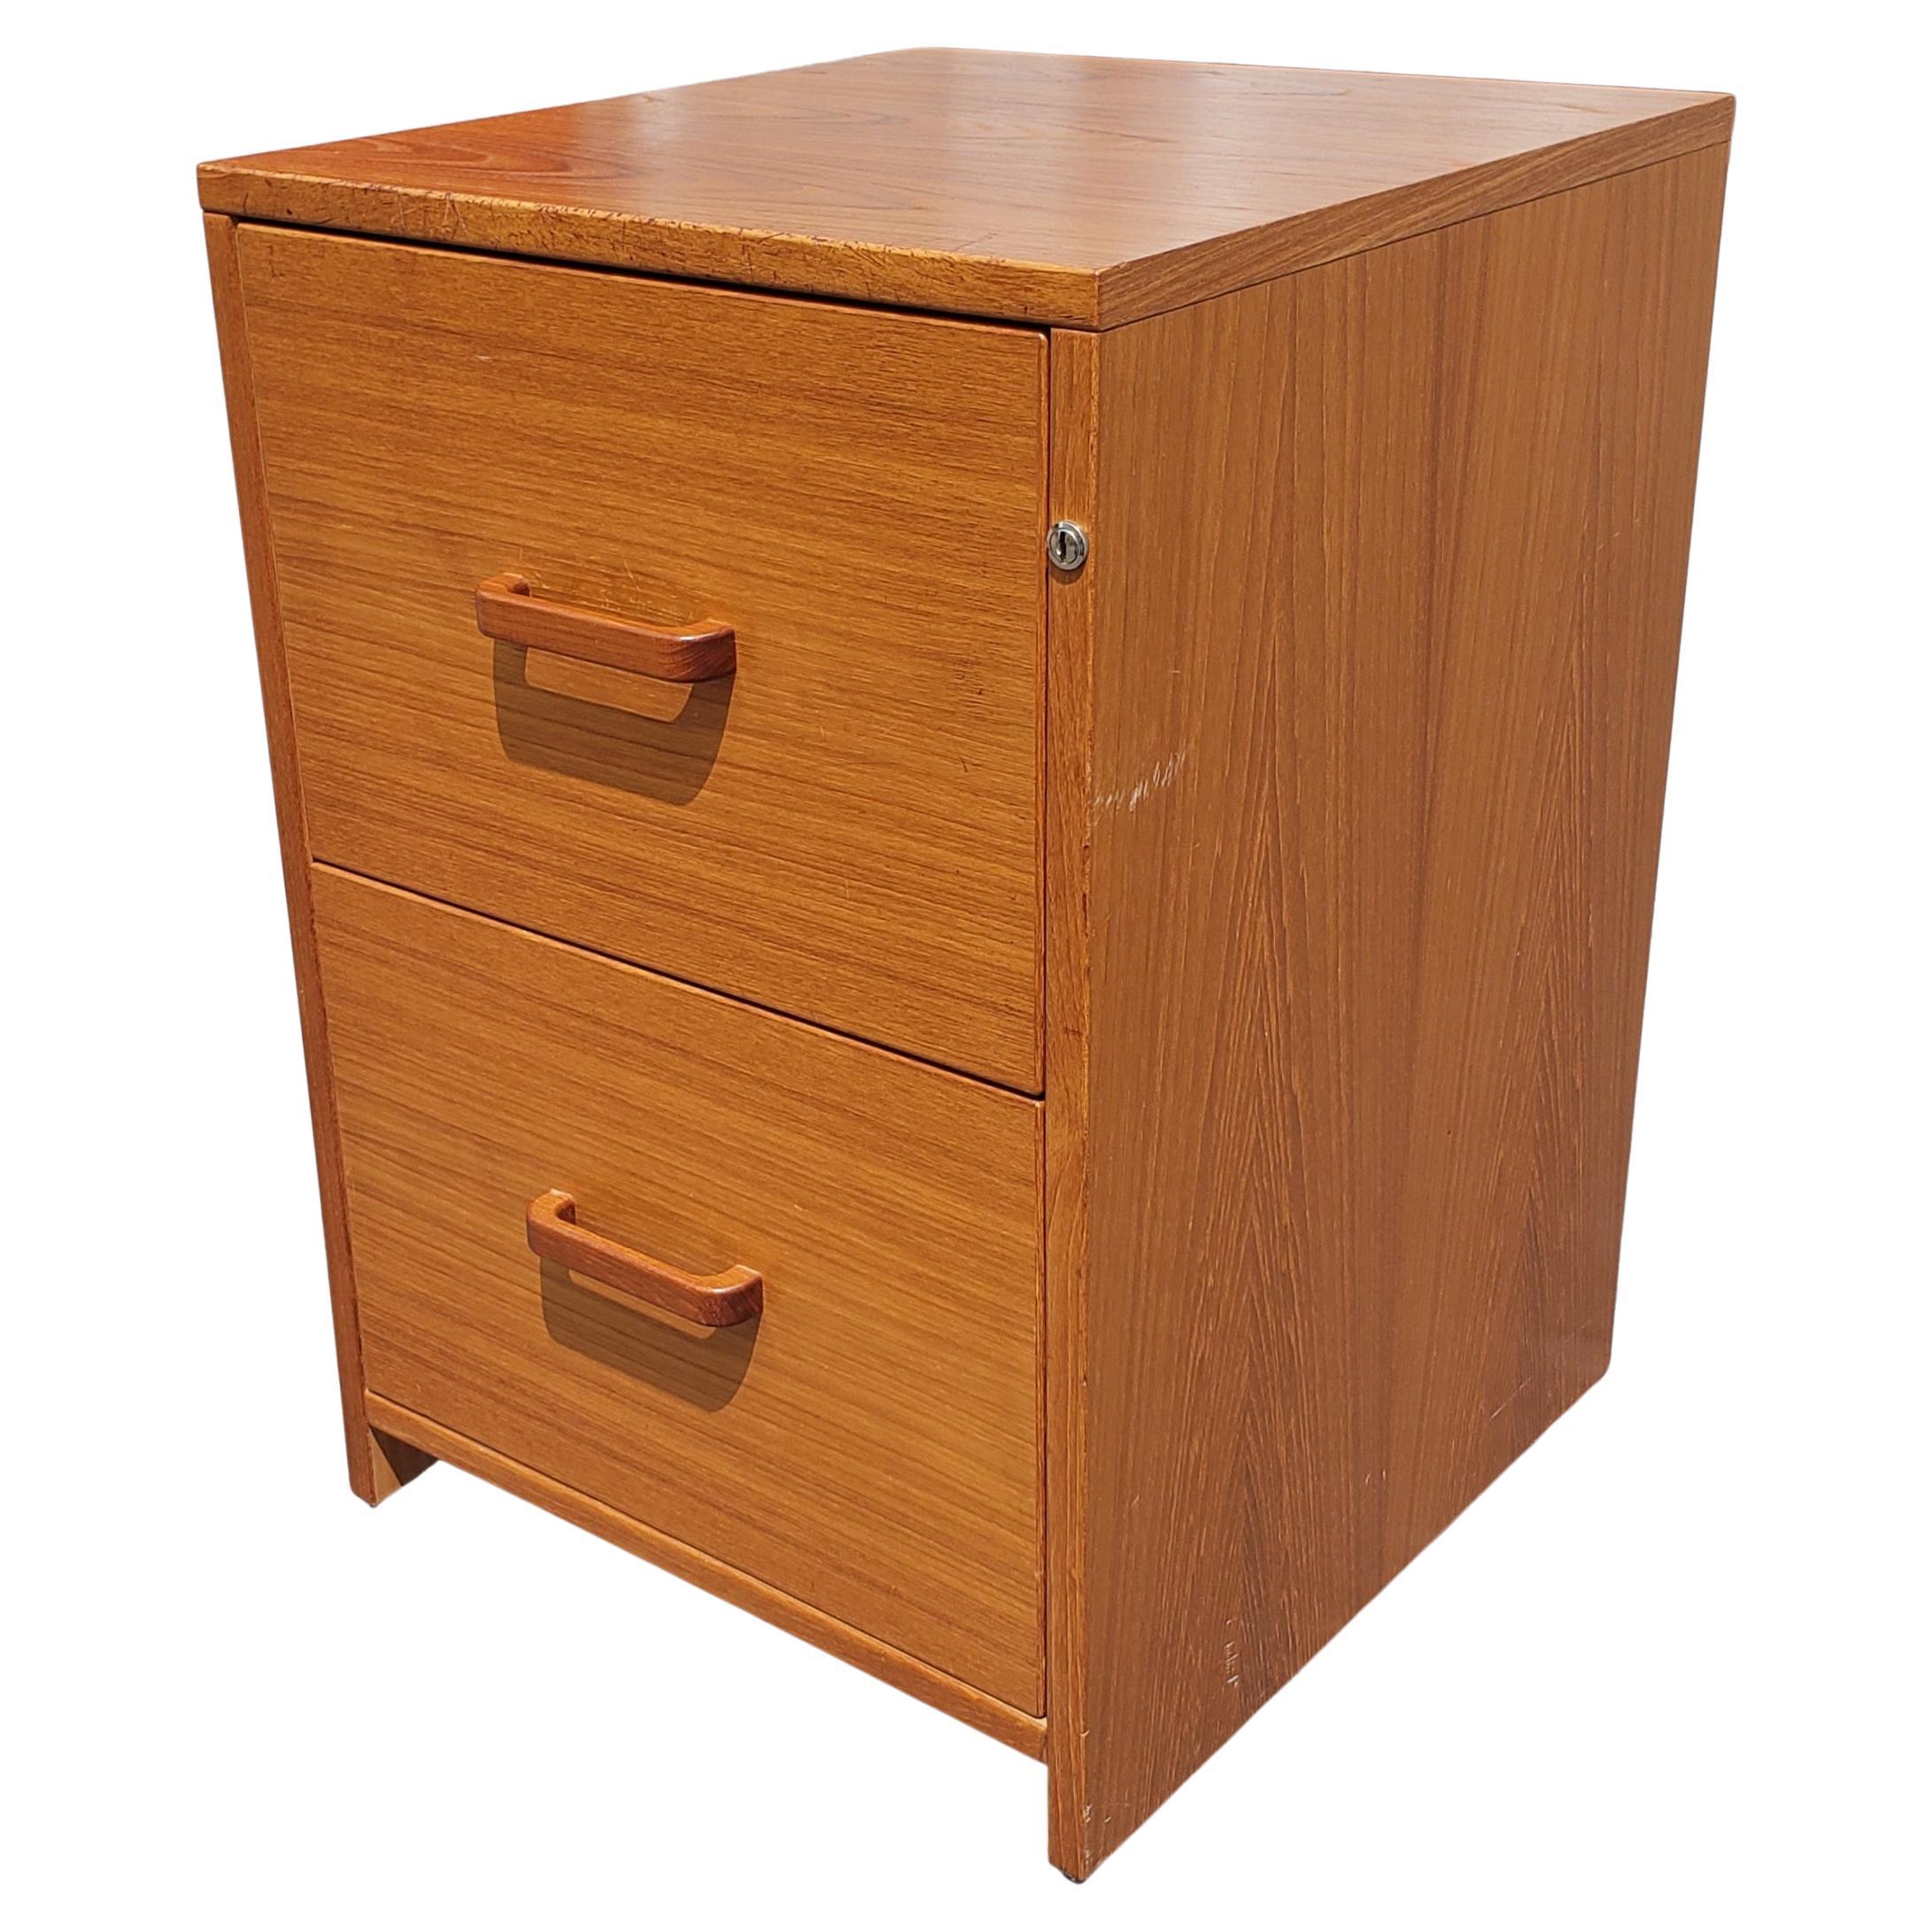 2 drawer wood file cabinet with wheels